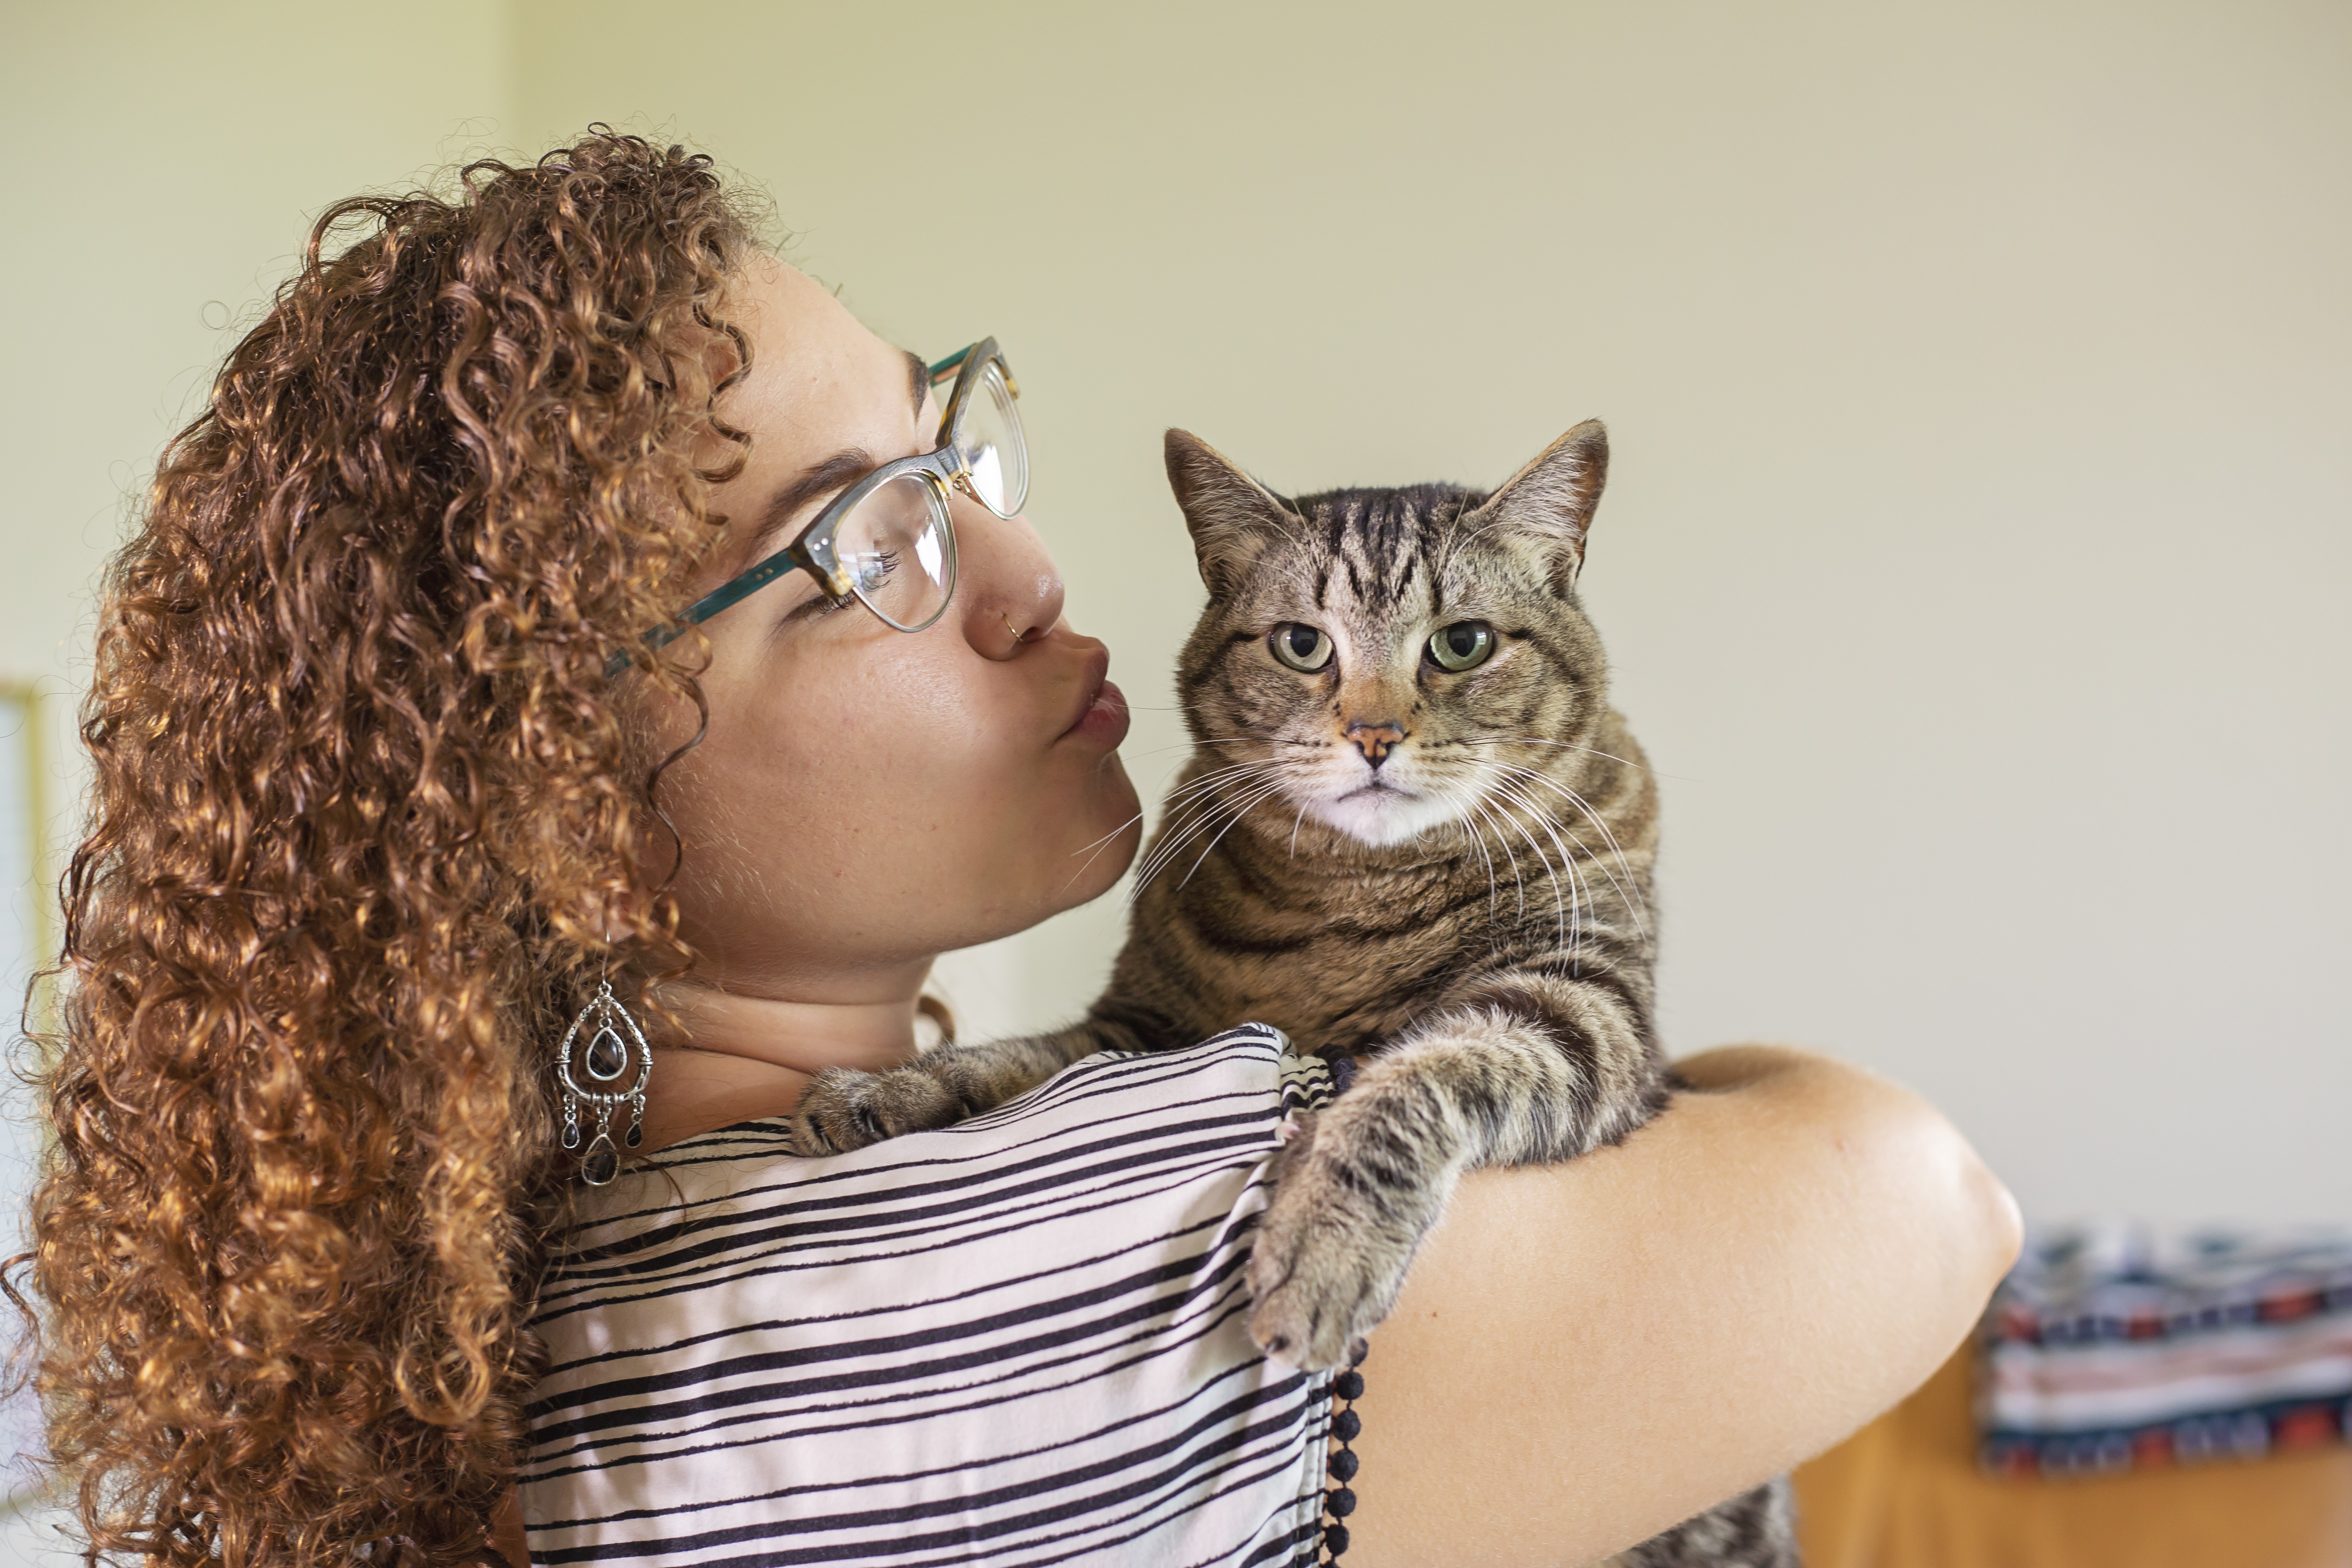 A girl gives her cat a kiss on the cheek.